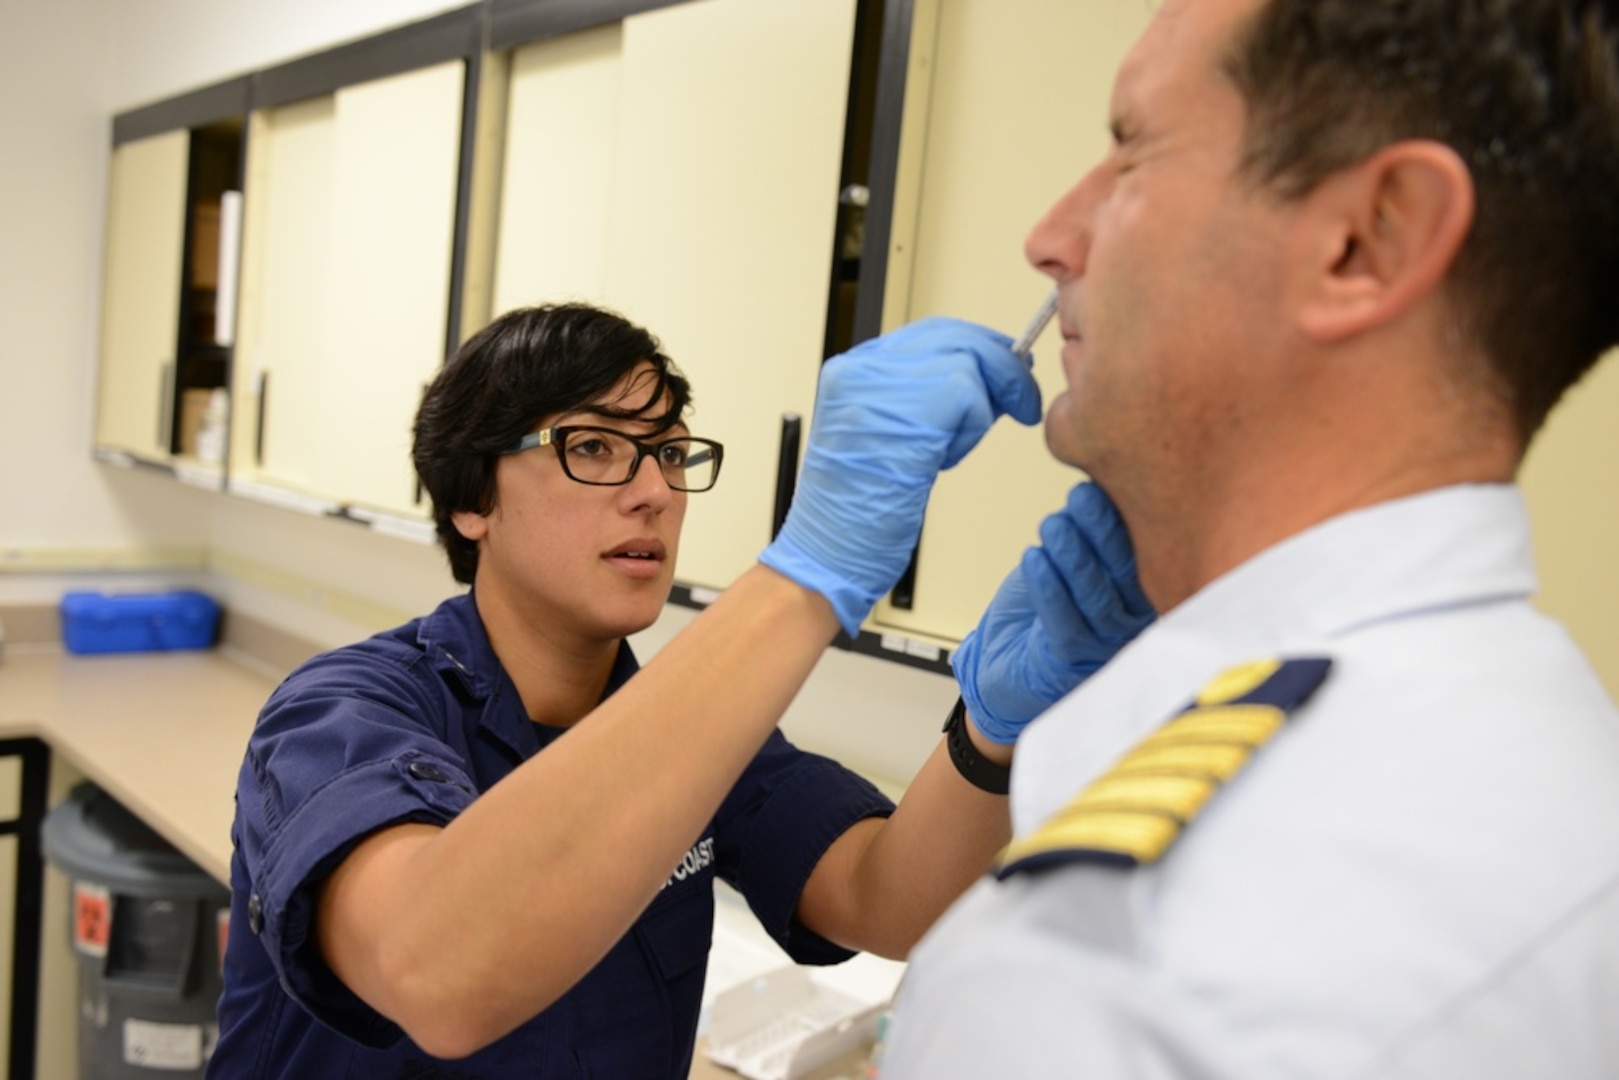 Petty Officer 3rd Class Amber Degouveia, a health series technician assigned to Coast Guard Base Alameda Medical, administers the intranasal flu vaccine to a Coast Guard member while at the Base Alameda clinic Thursday, Oct. 1, 2015. To maintain mission readiness, Coast Guard personnel are required to receive the annual influenza vaccine during the required vaccination period. (U.S. Coast Guard photo by Petty Officer 2nd Class Barry Bena)